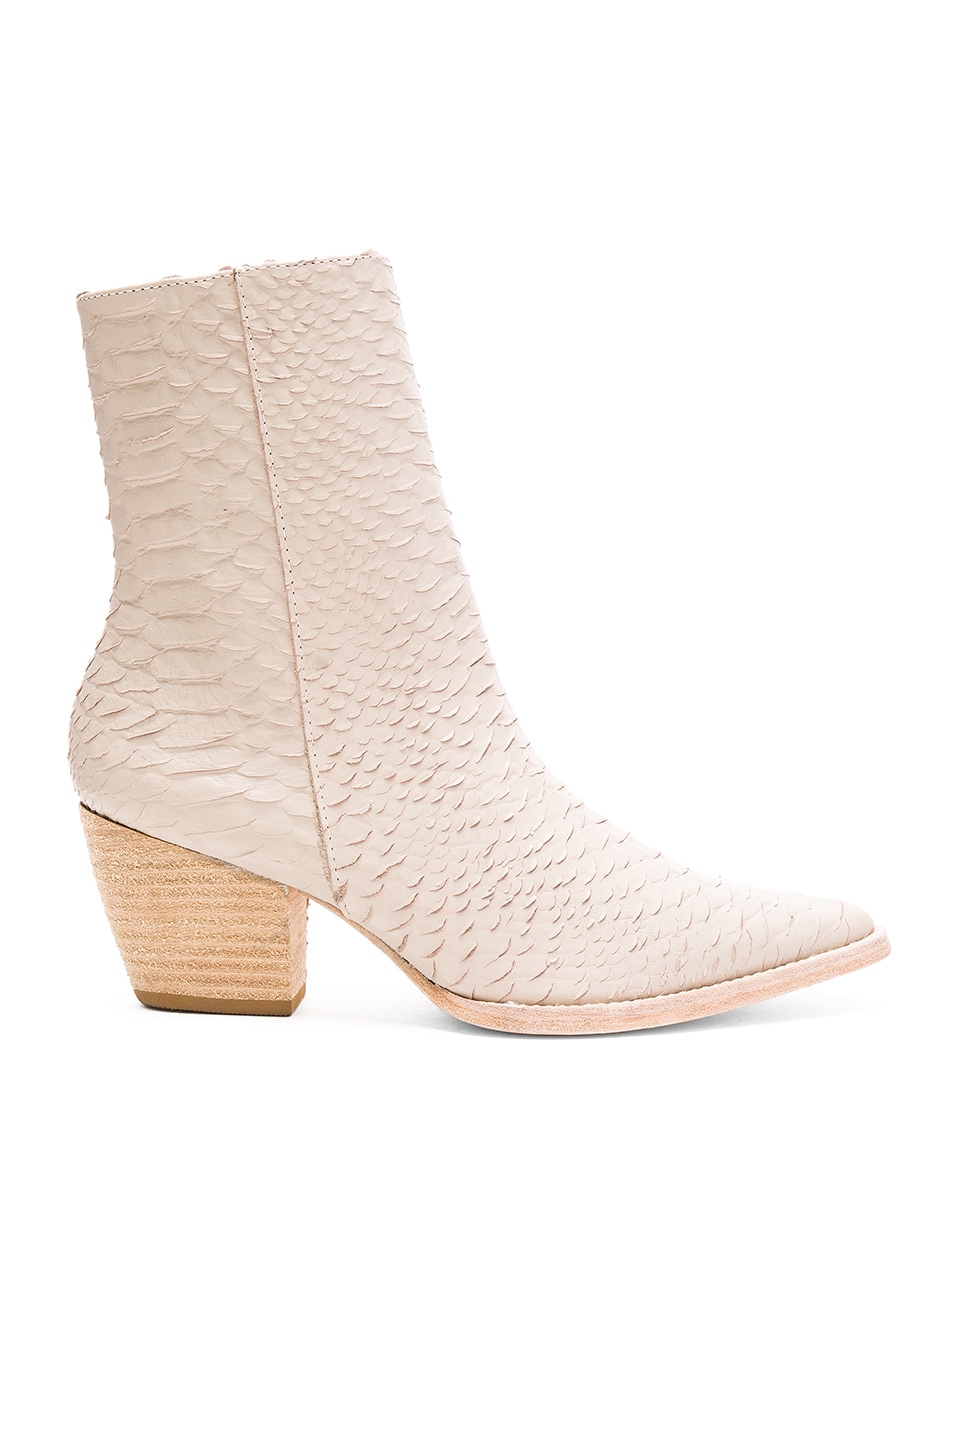 Matisse Caty Boot in Ivory | REVOLVE